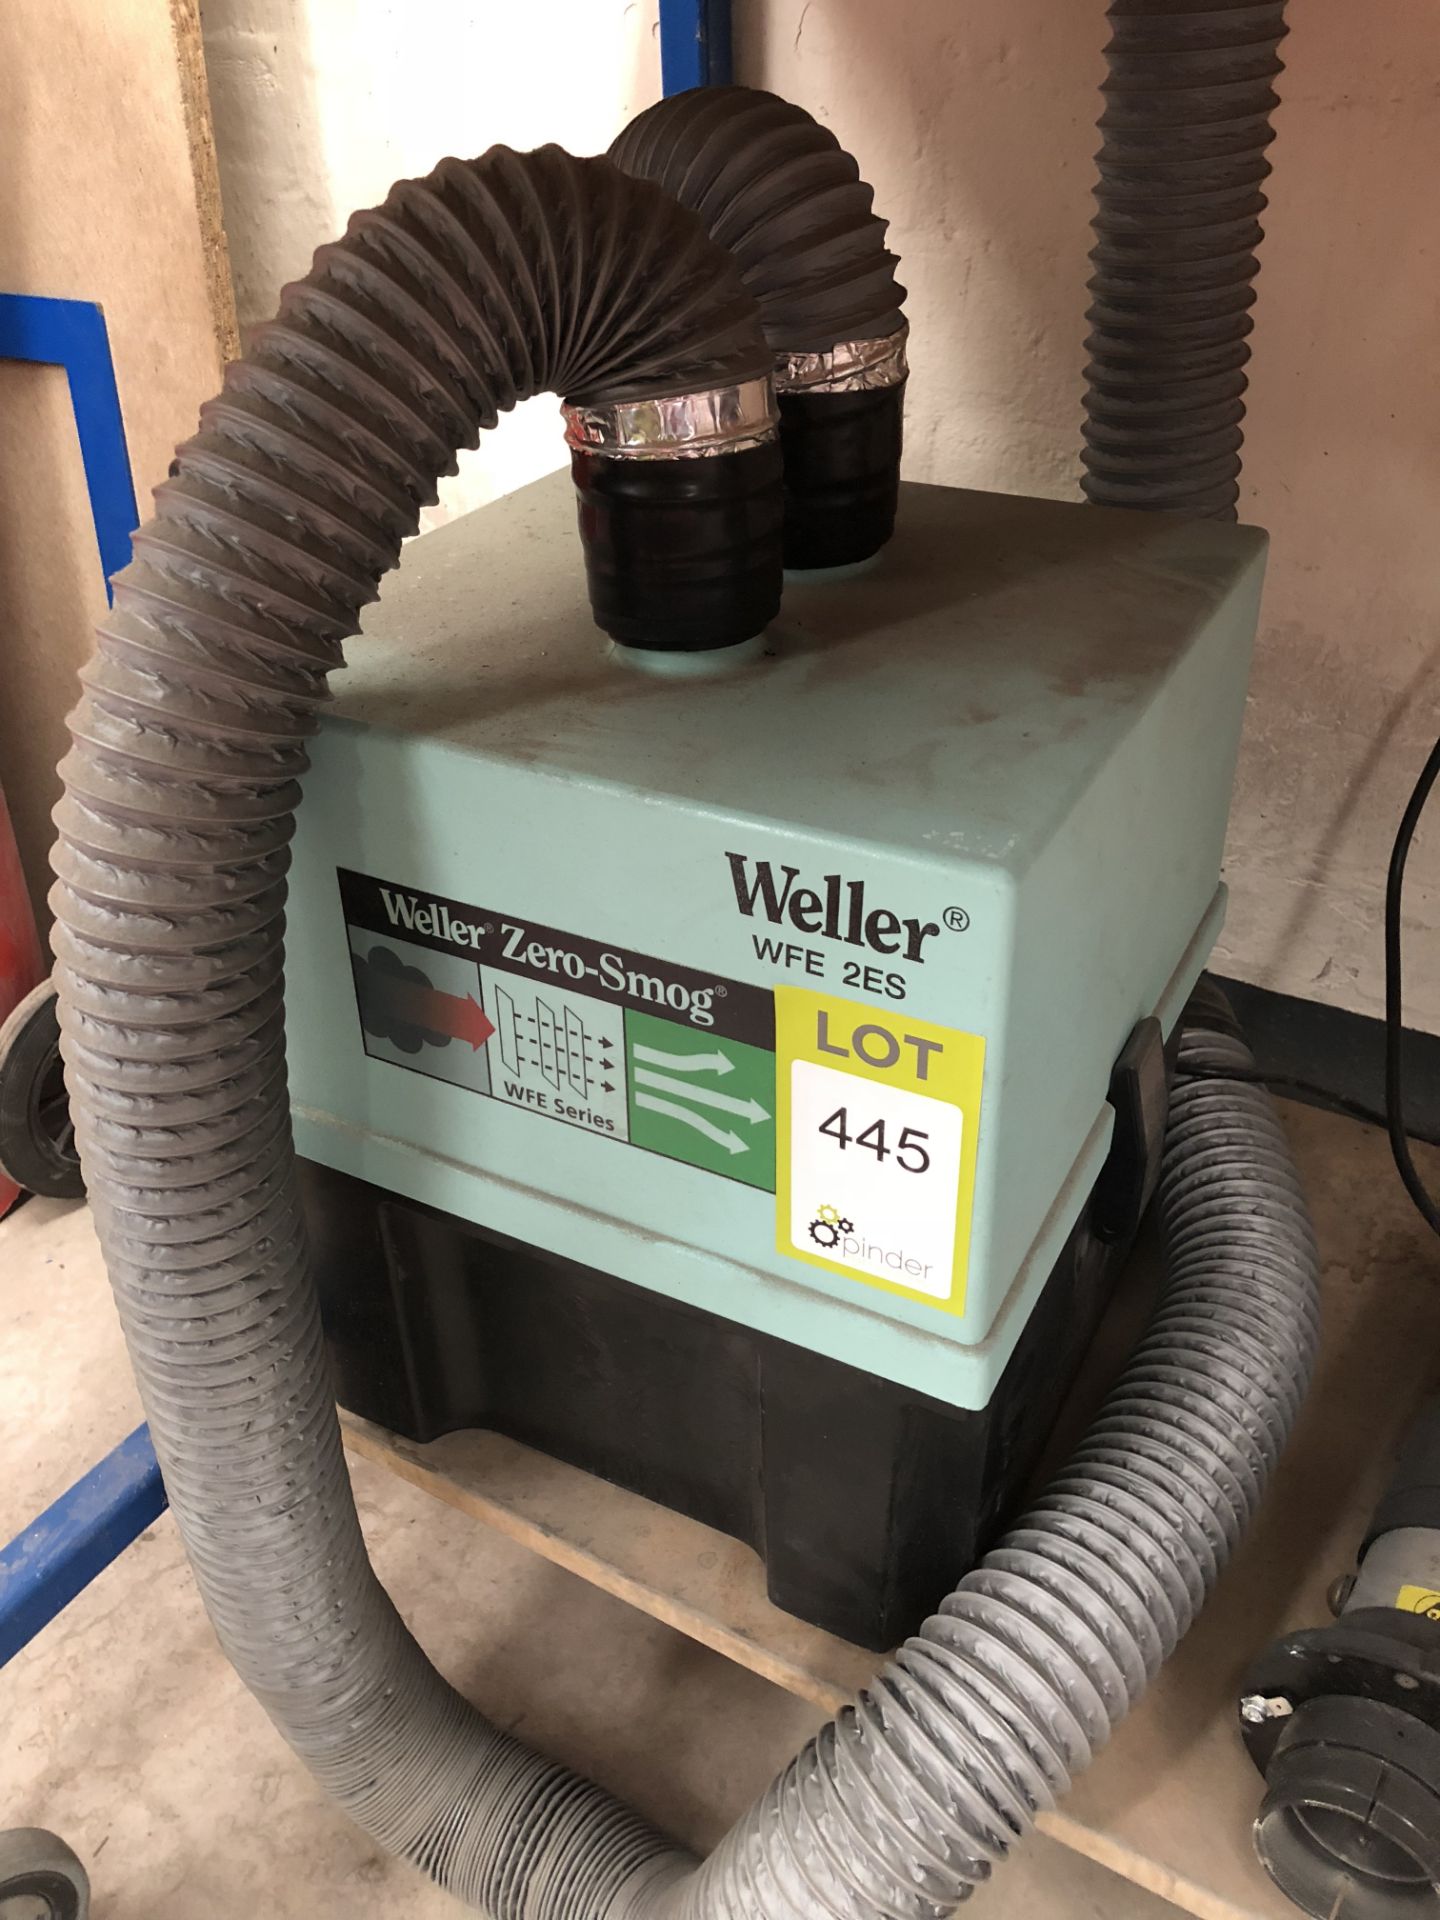 Weller WFE2ES Fume Extractor, 240volts and mobile Workbench, 1800mm x 750mm (located in Bay 4) - Image 2 of 3